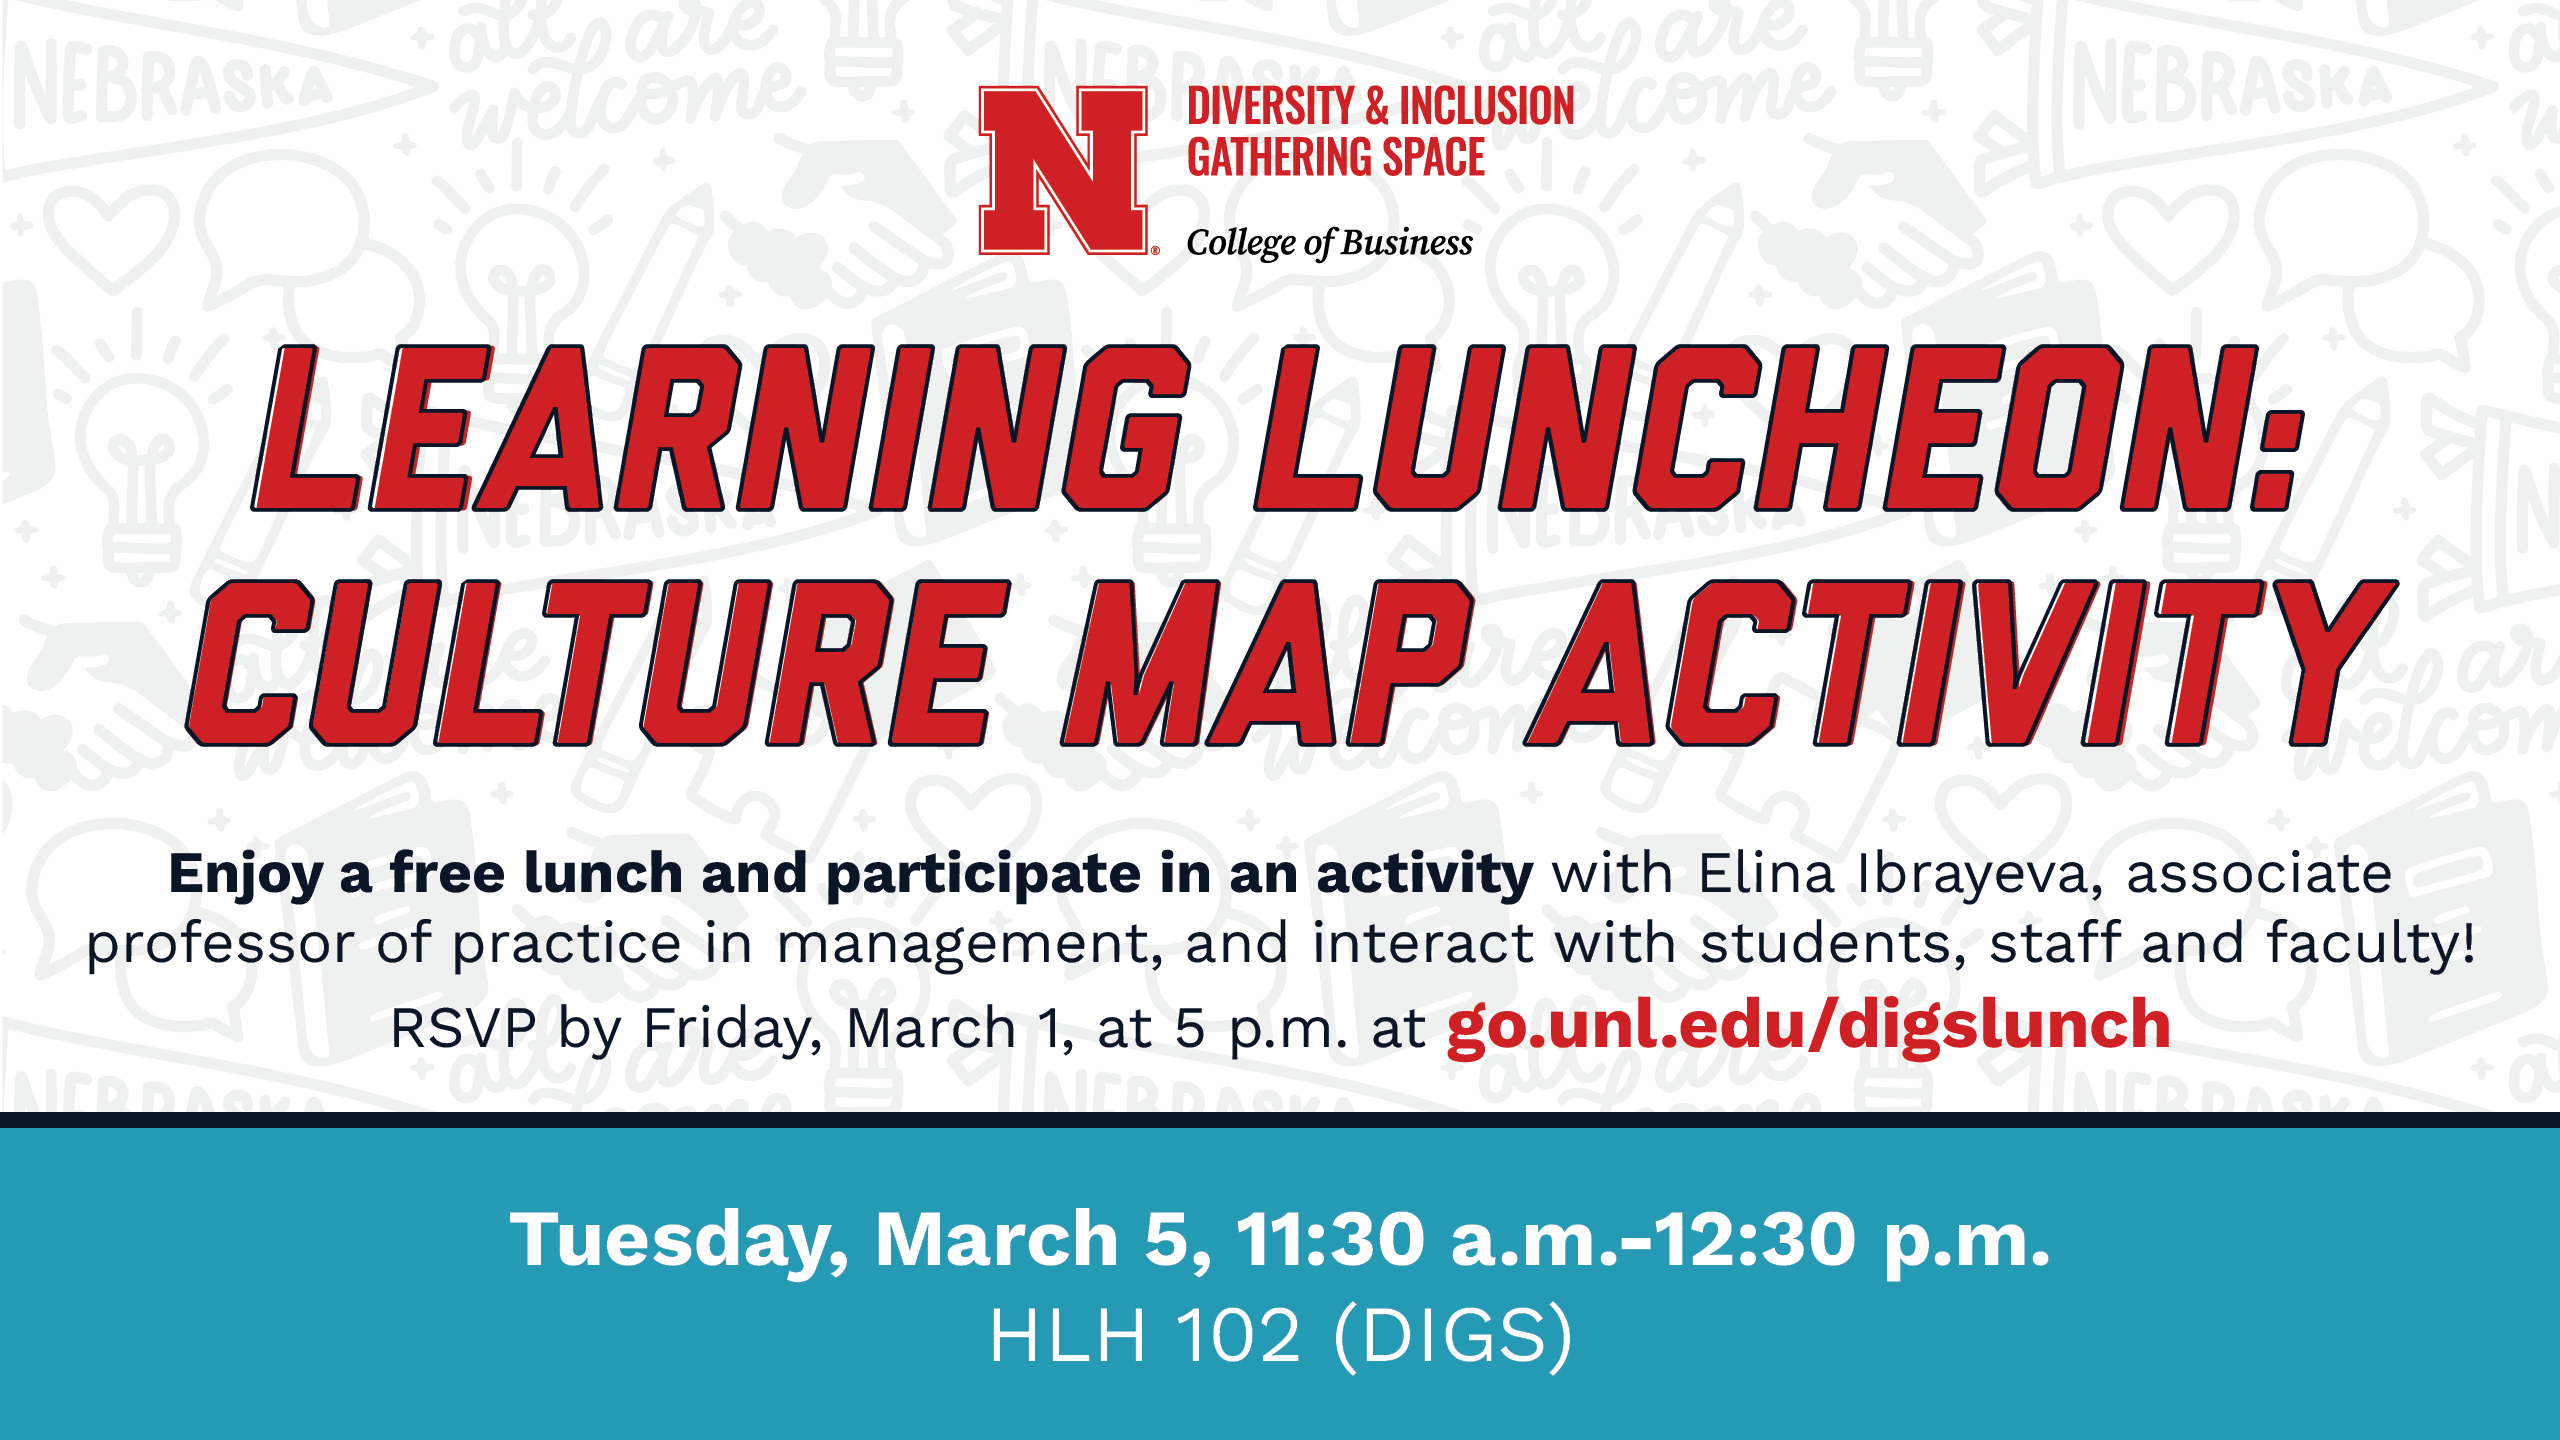 Learning Luncheon: Cultural Map Activity | Tuesday, March 5 at 11:30 a.m. 